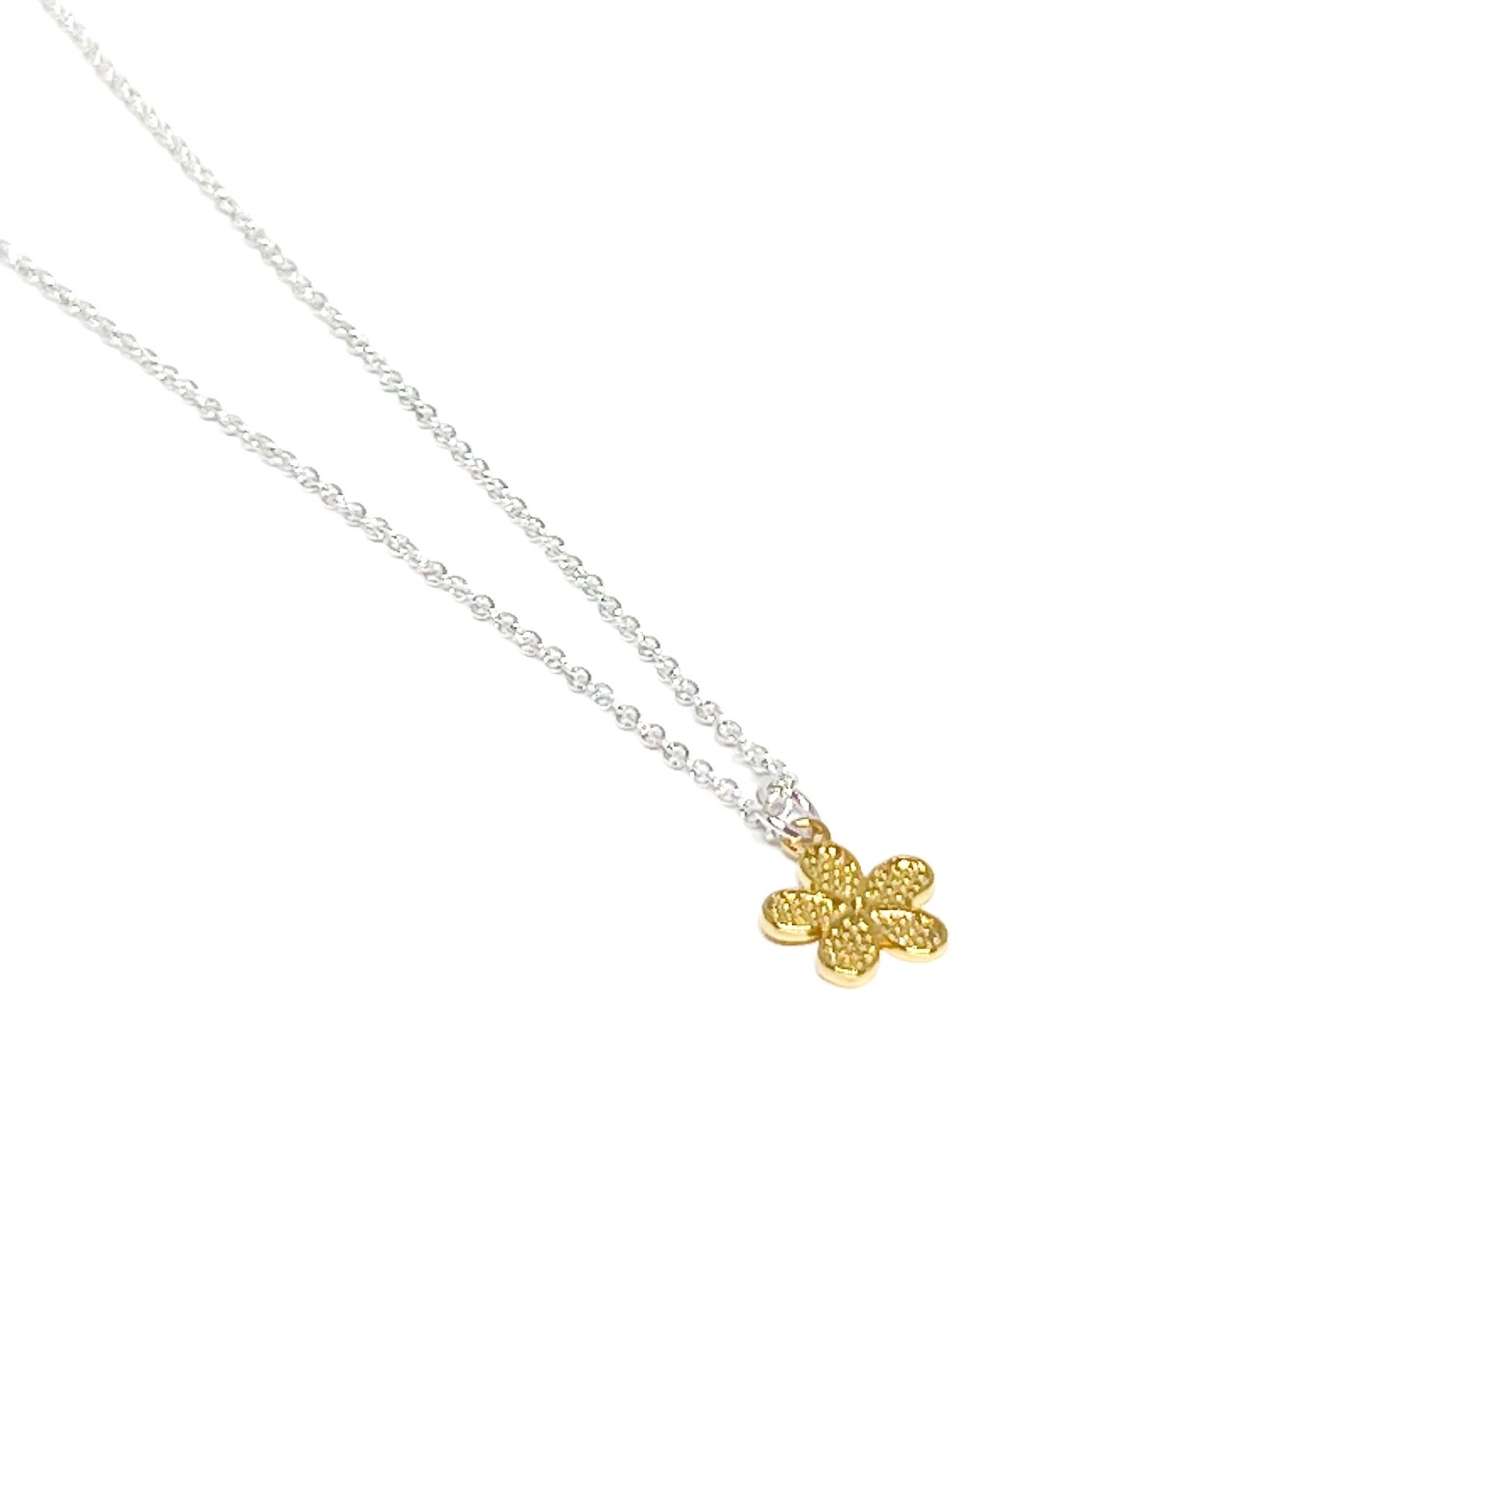 Eleanor Flower Necklace - Gold